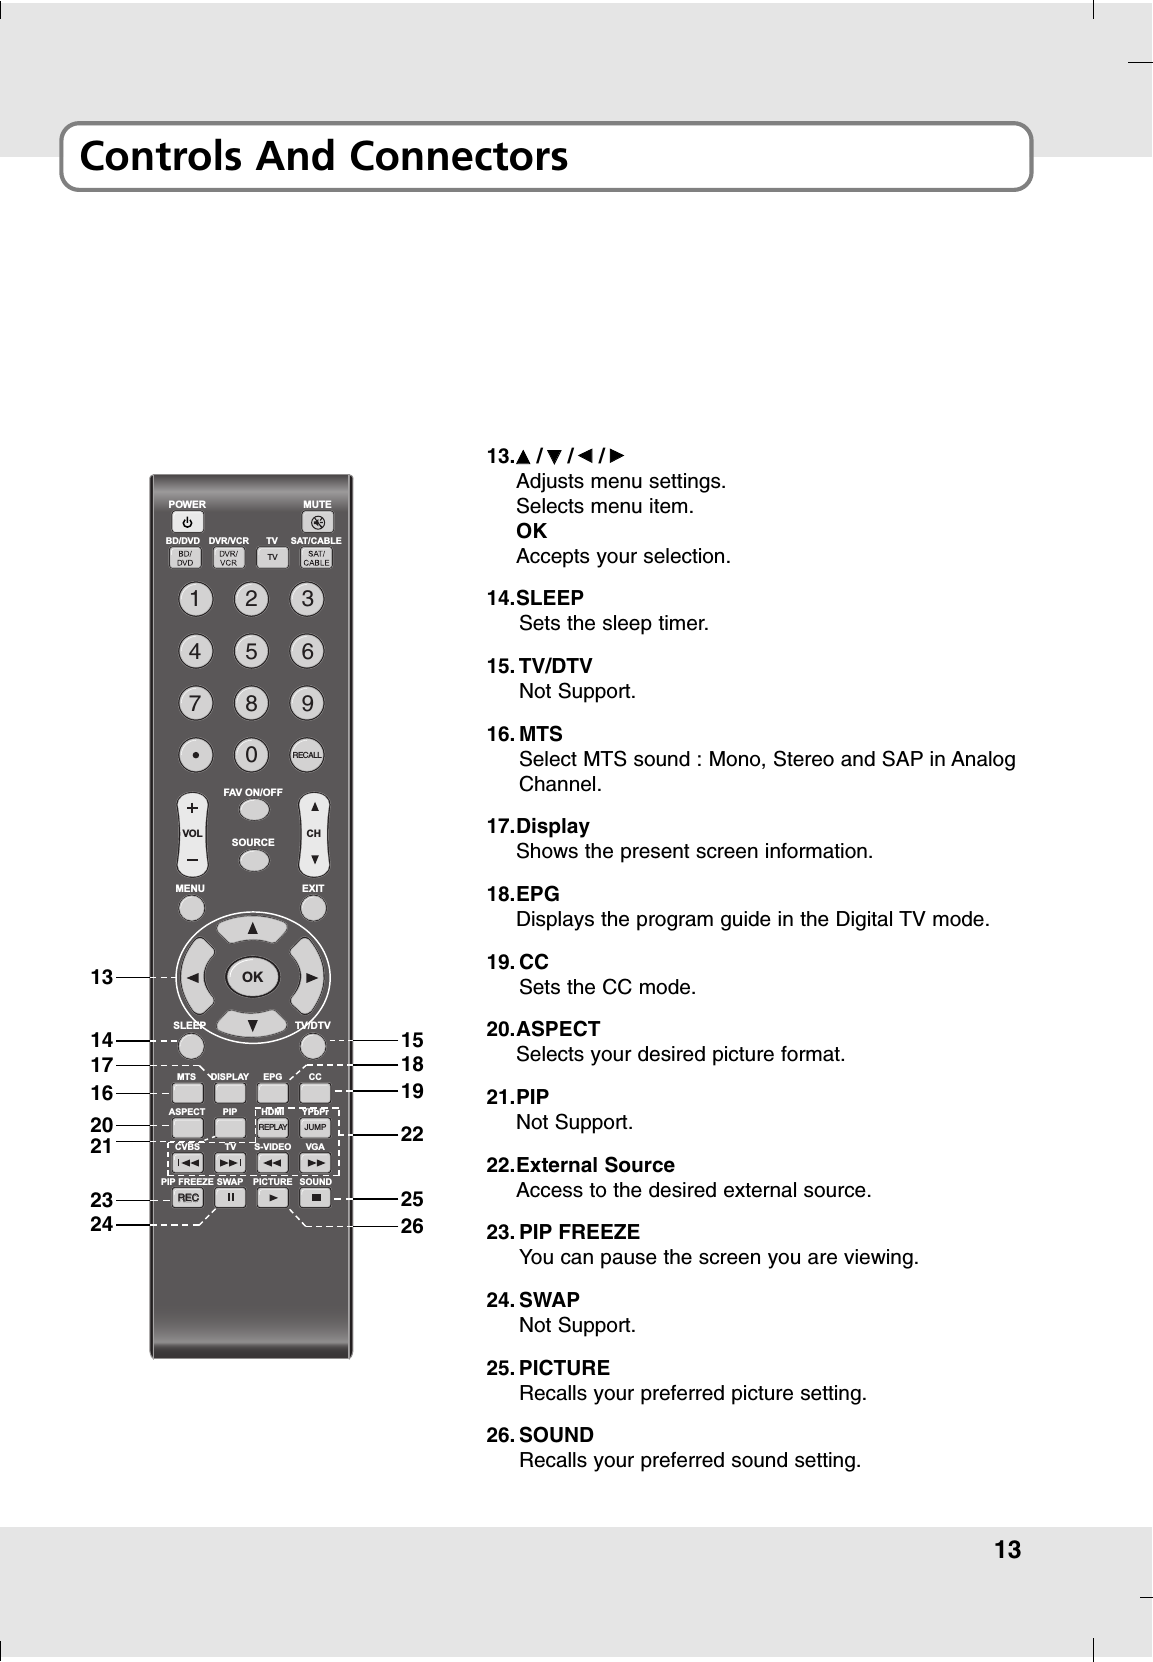 13Controls And ConnectorsPOWERBD/DVD DVR/VCRFAV ON/OFFSOURCEMENU EXITSLEEP TV/DTVTVTV SAT/CABLEMUTE1234567890RECALLVOL C HOKMTS DISPLAY EPG CCASPECT PIP HDMI YPbPrCVBS TV S-VIDEO VGASWAPPIP FREEZE PICTURE SOUNDREPLAY JUMPRECREC13.DD/EE/FF/GGAdjusts menu settings.Selects menu item.OKAccepts your selection.14.SLEEPSets the sleep timer.15. TV/DTVNot Support.16. MTSSelect MTS sound : Mono, Stereo and SAP in AnalogChannel.17.DisplayShows the present screen information.18.EPGDisplays the program guide in the Digital TV mode.19. CCSets the CC mode.20.ASPECTSelects your desired picture format.21.PIPNot Support.22.External SourceAccess to the desired external source.23. PIP FREEZEYou can pause the screen you are viewing. 24. SWAPNot Support.25. PICTURERecalls your preferred picture setting.26. SOUNDRecalls your preferred sound setting.1413162021232417151819222526